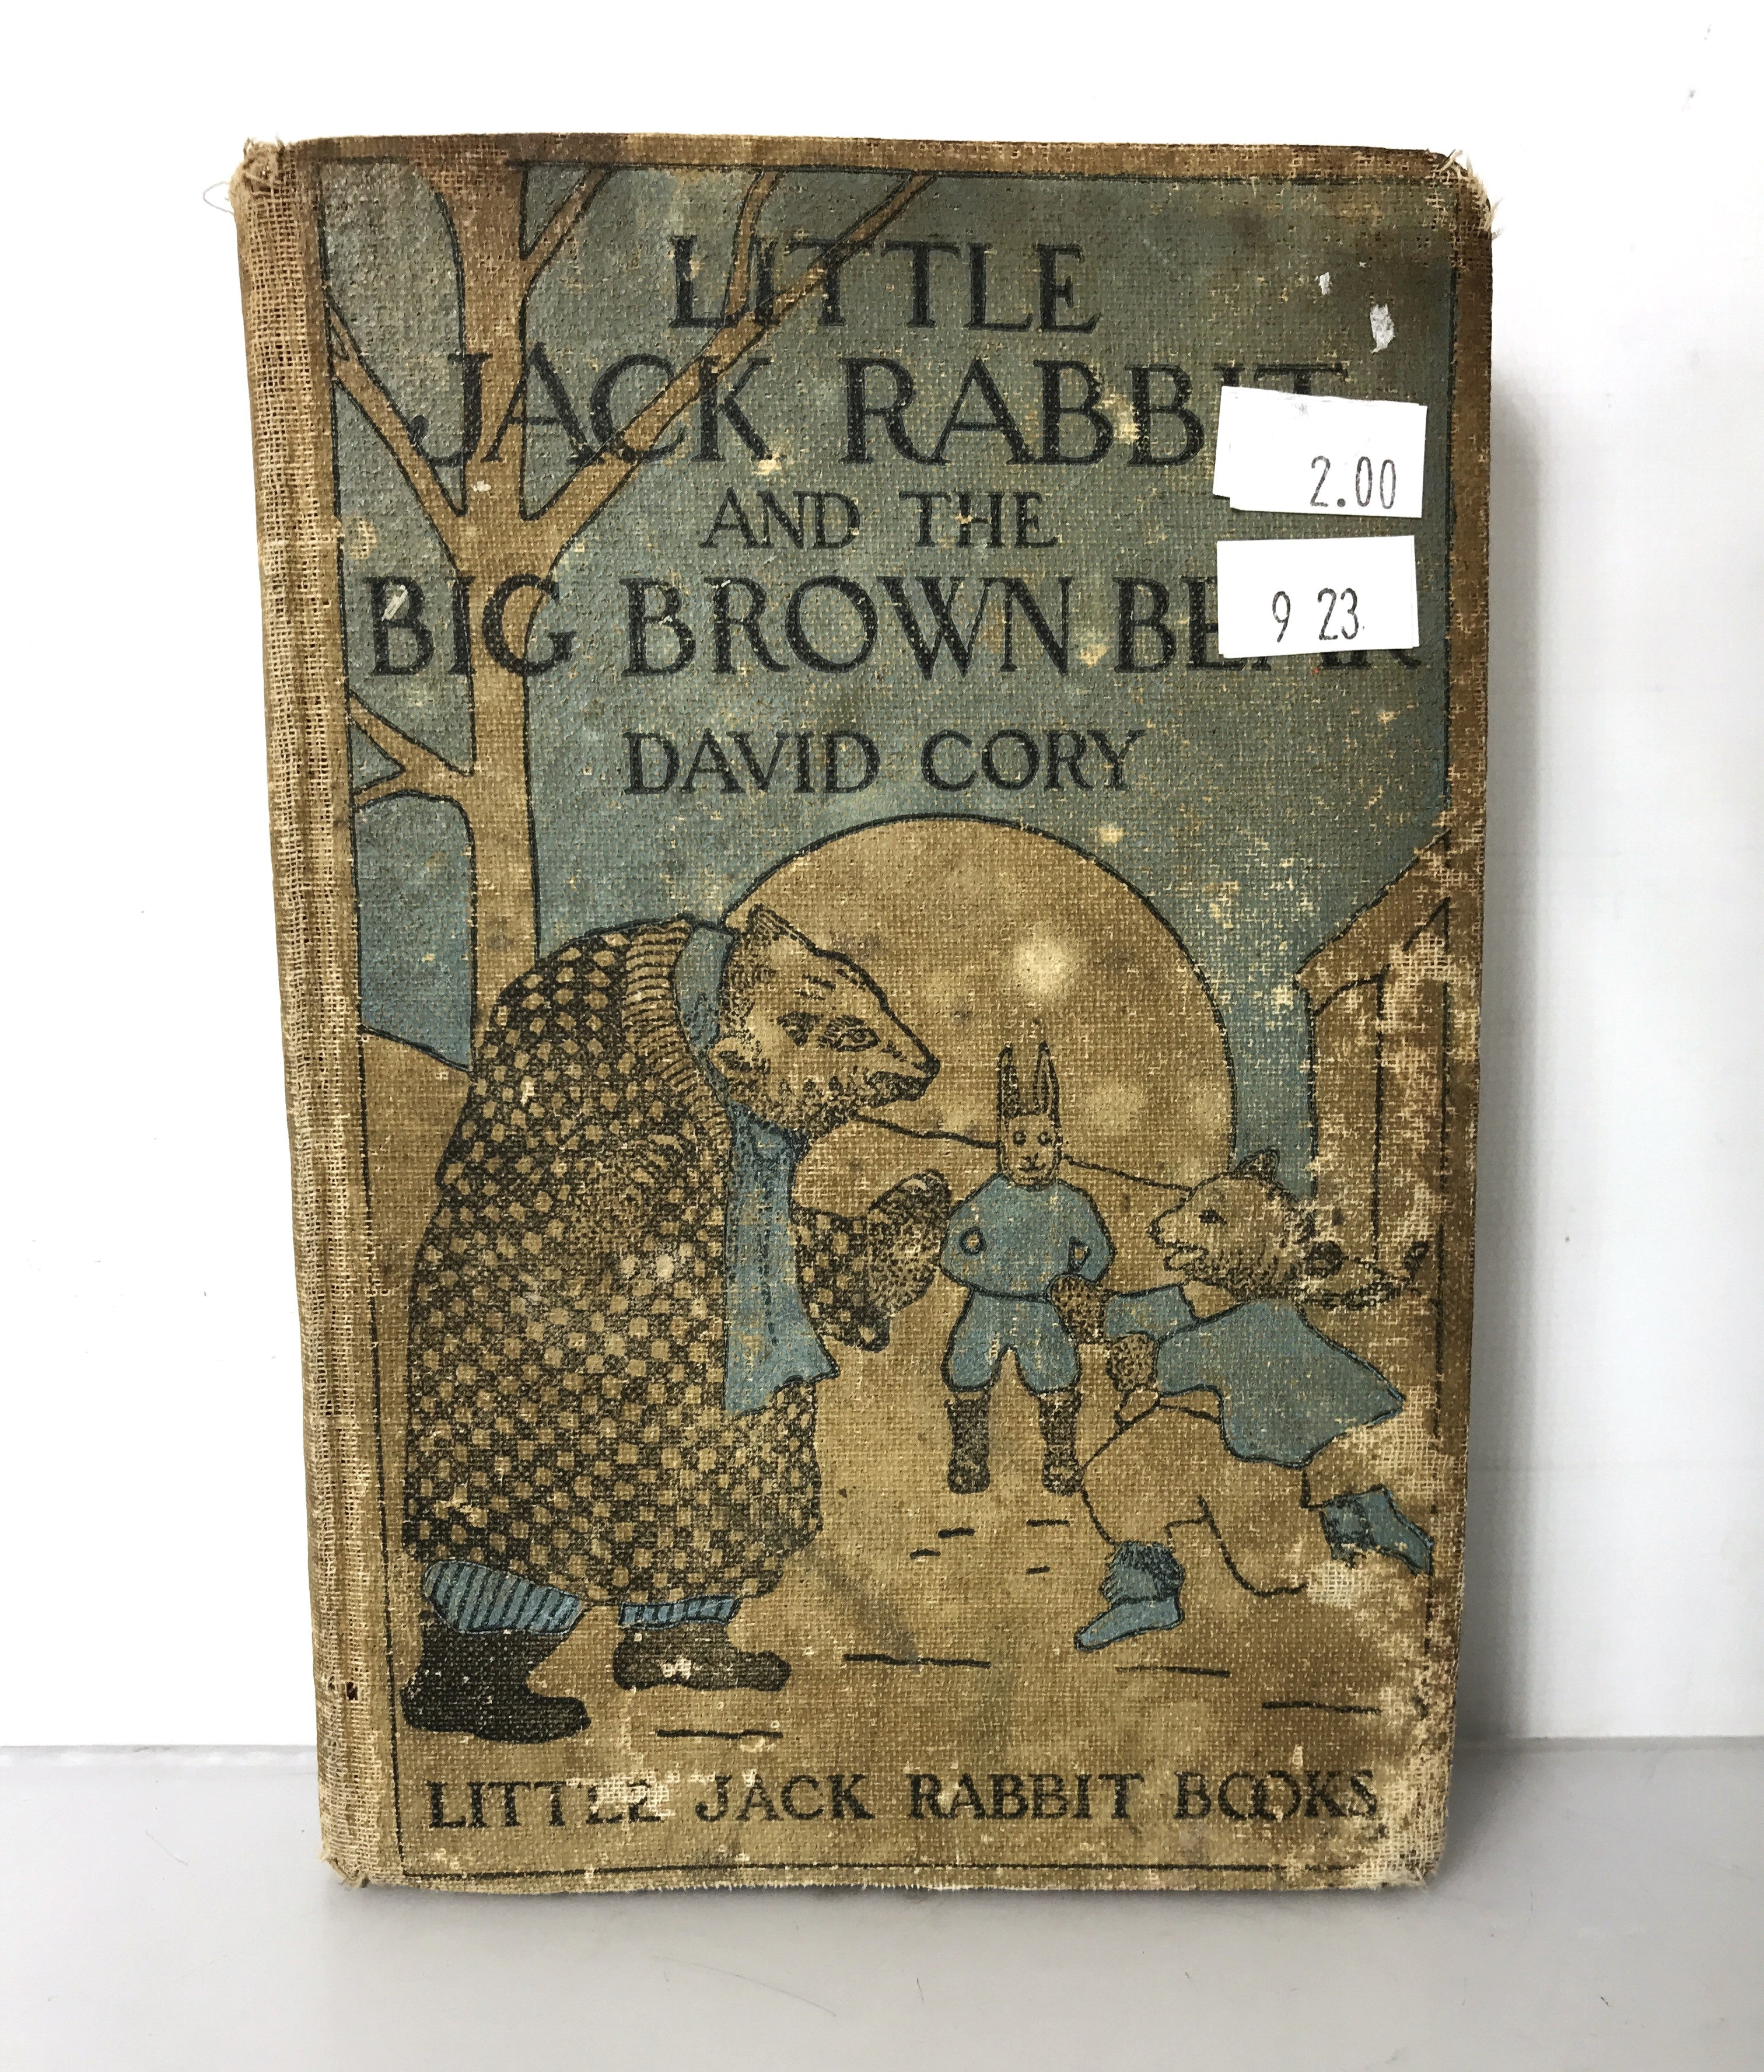 Little Jack Rabbit and the Big Brown Bear by David Cory 1921 HC